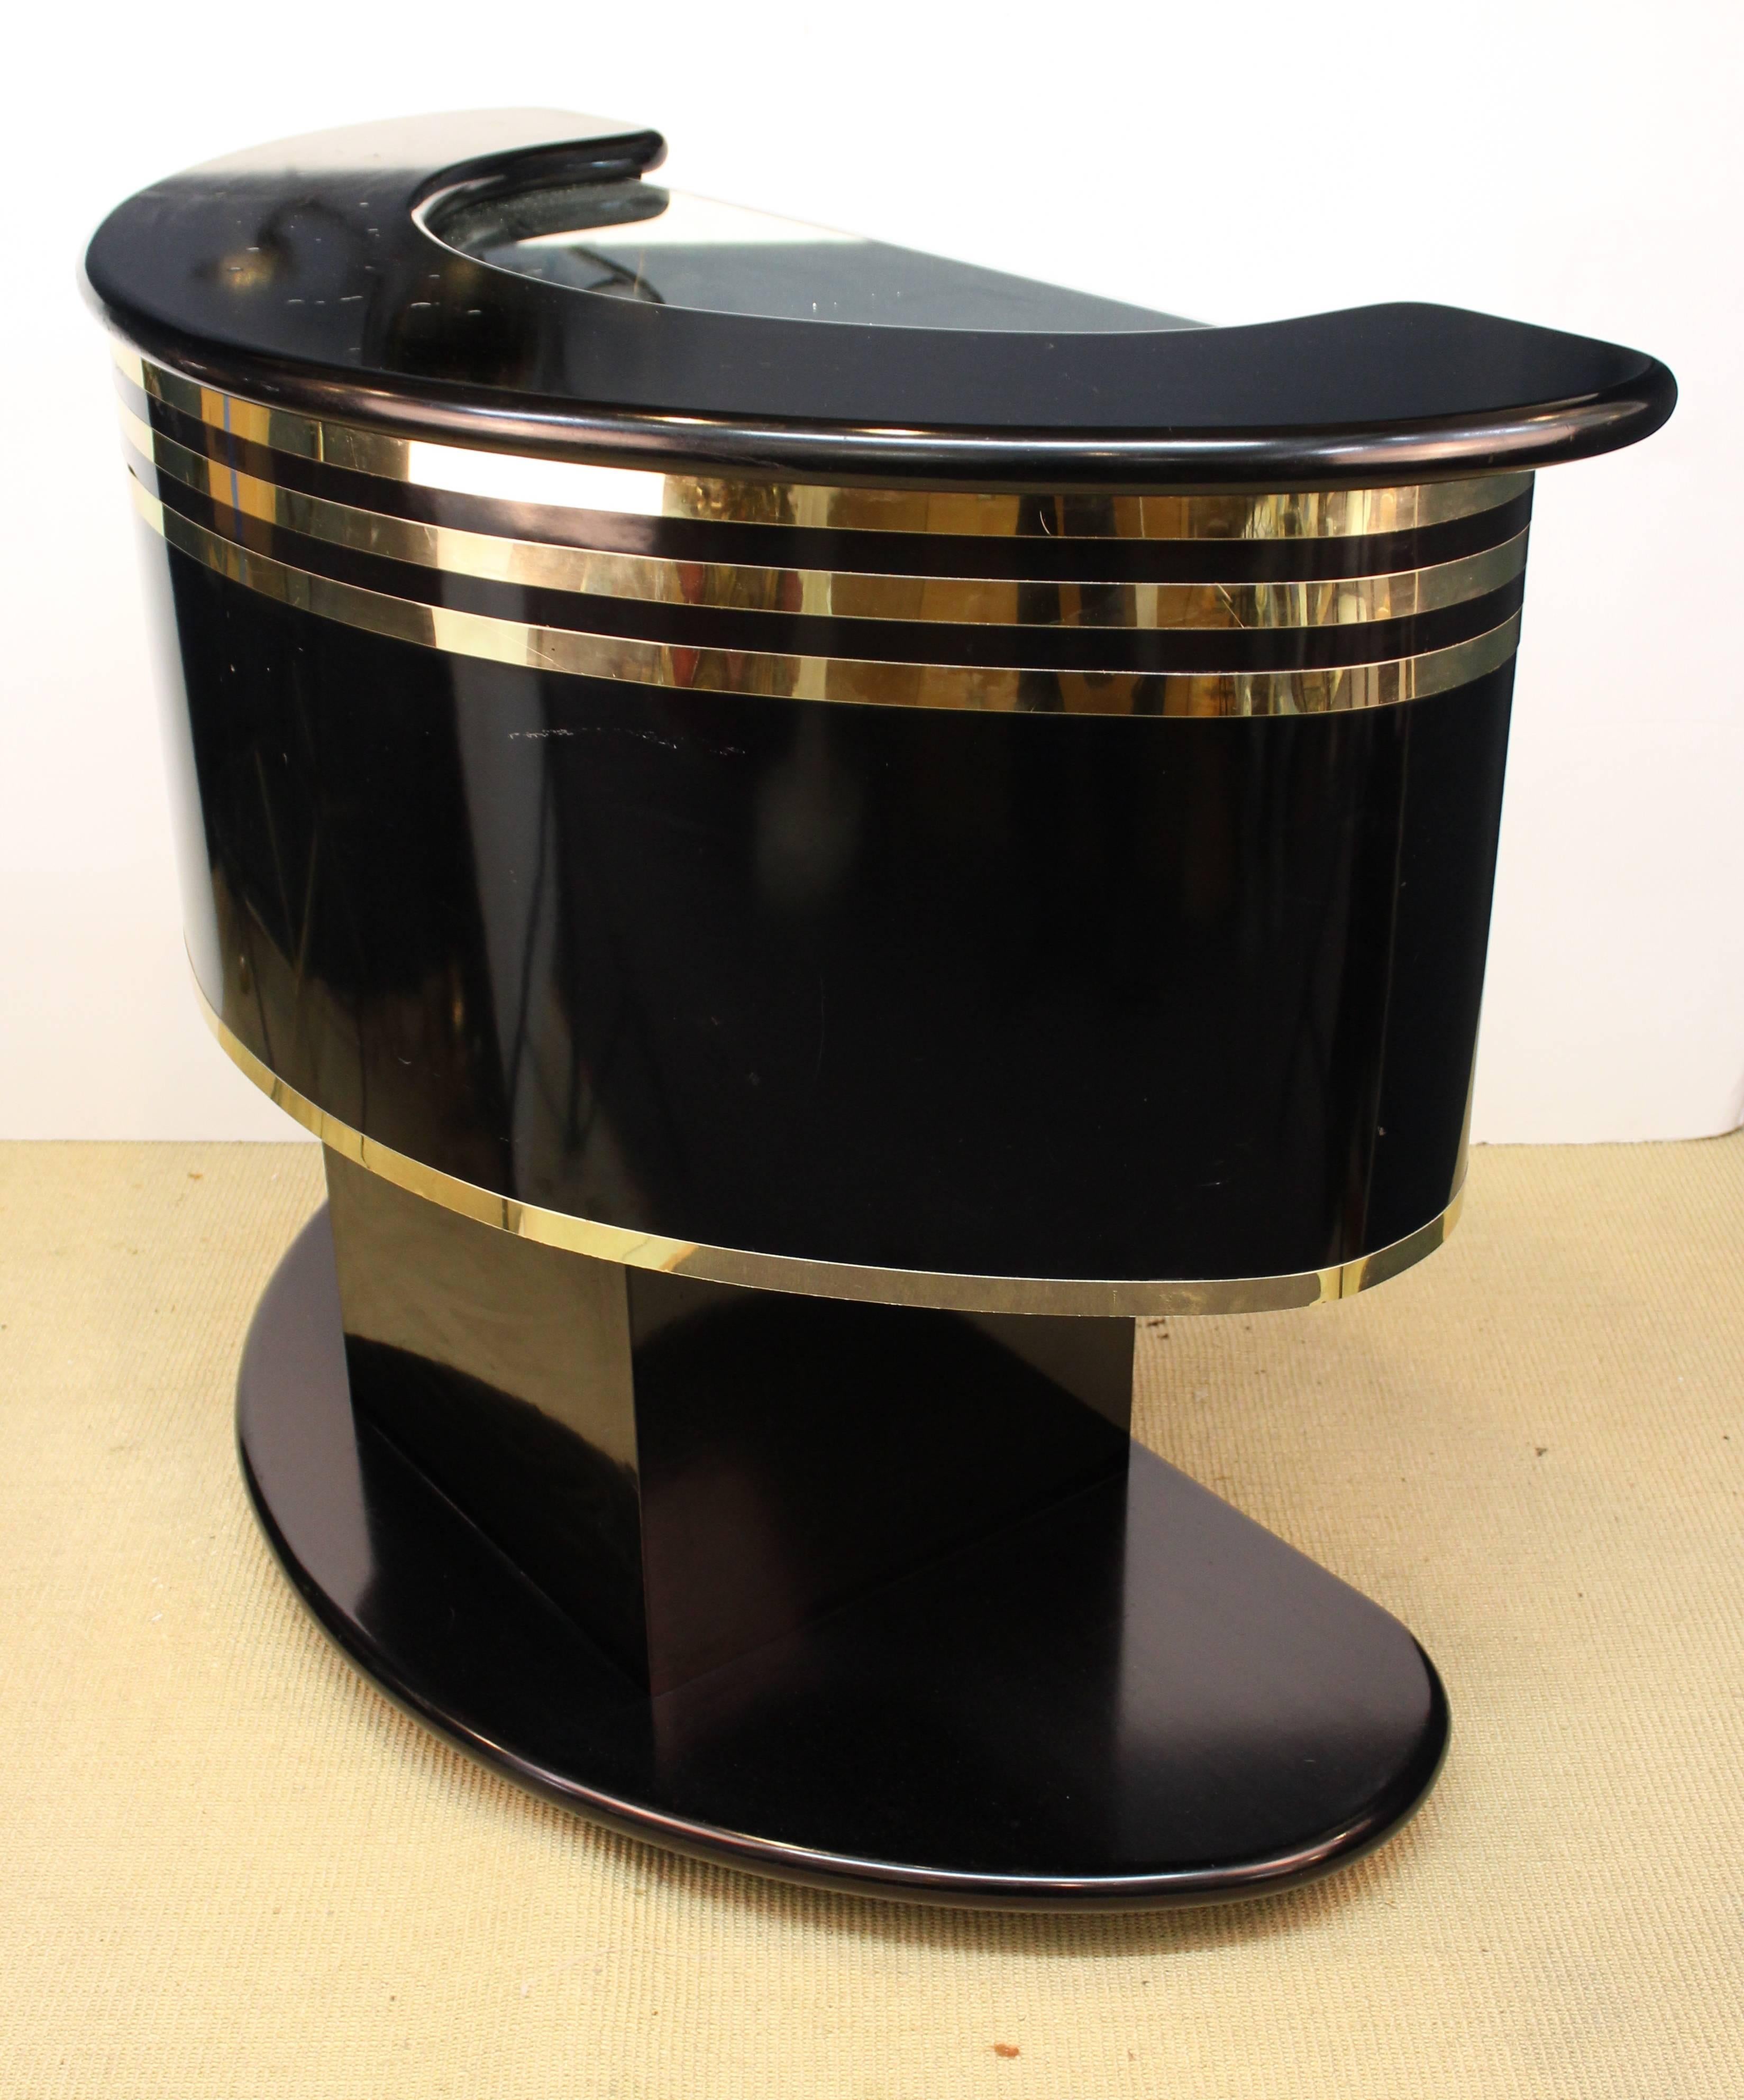 Hollywood Regency style half moon bar after Guzzini. Crafted in black laminate with mirrored glass accents and wood. Some bubbling of the laminate on the bar top and a small nick to the finish on the back. The bar remains in good vintage condition.